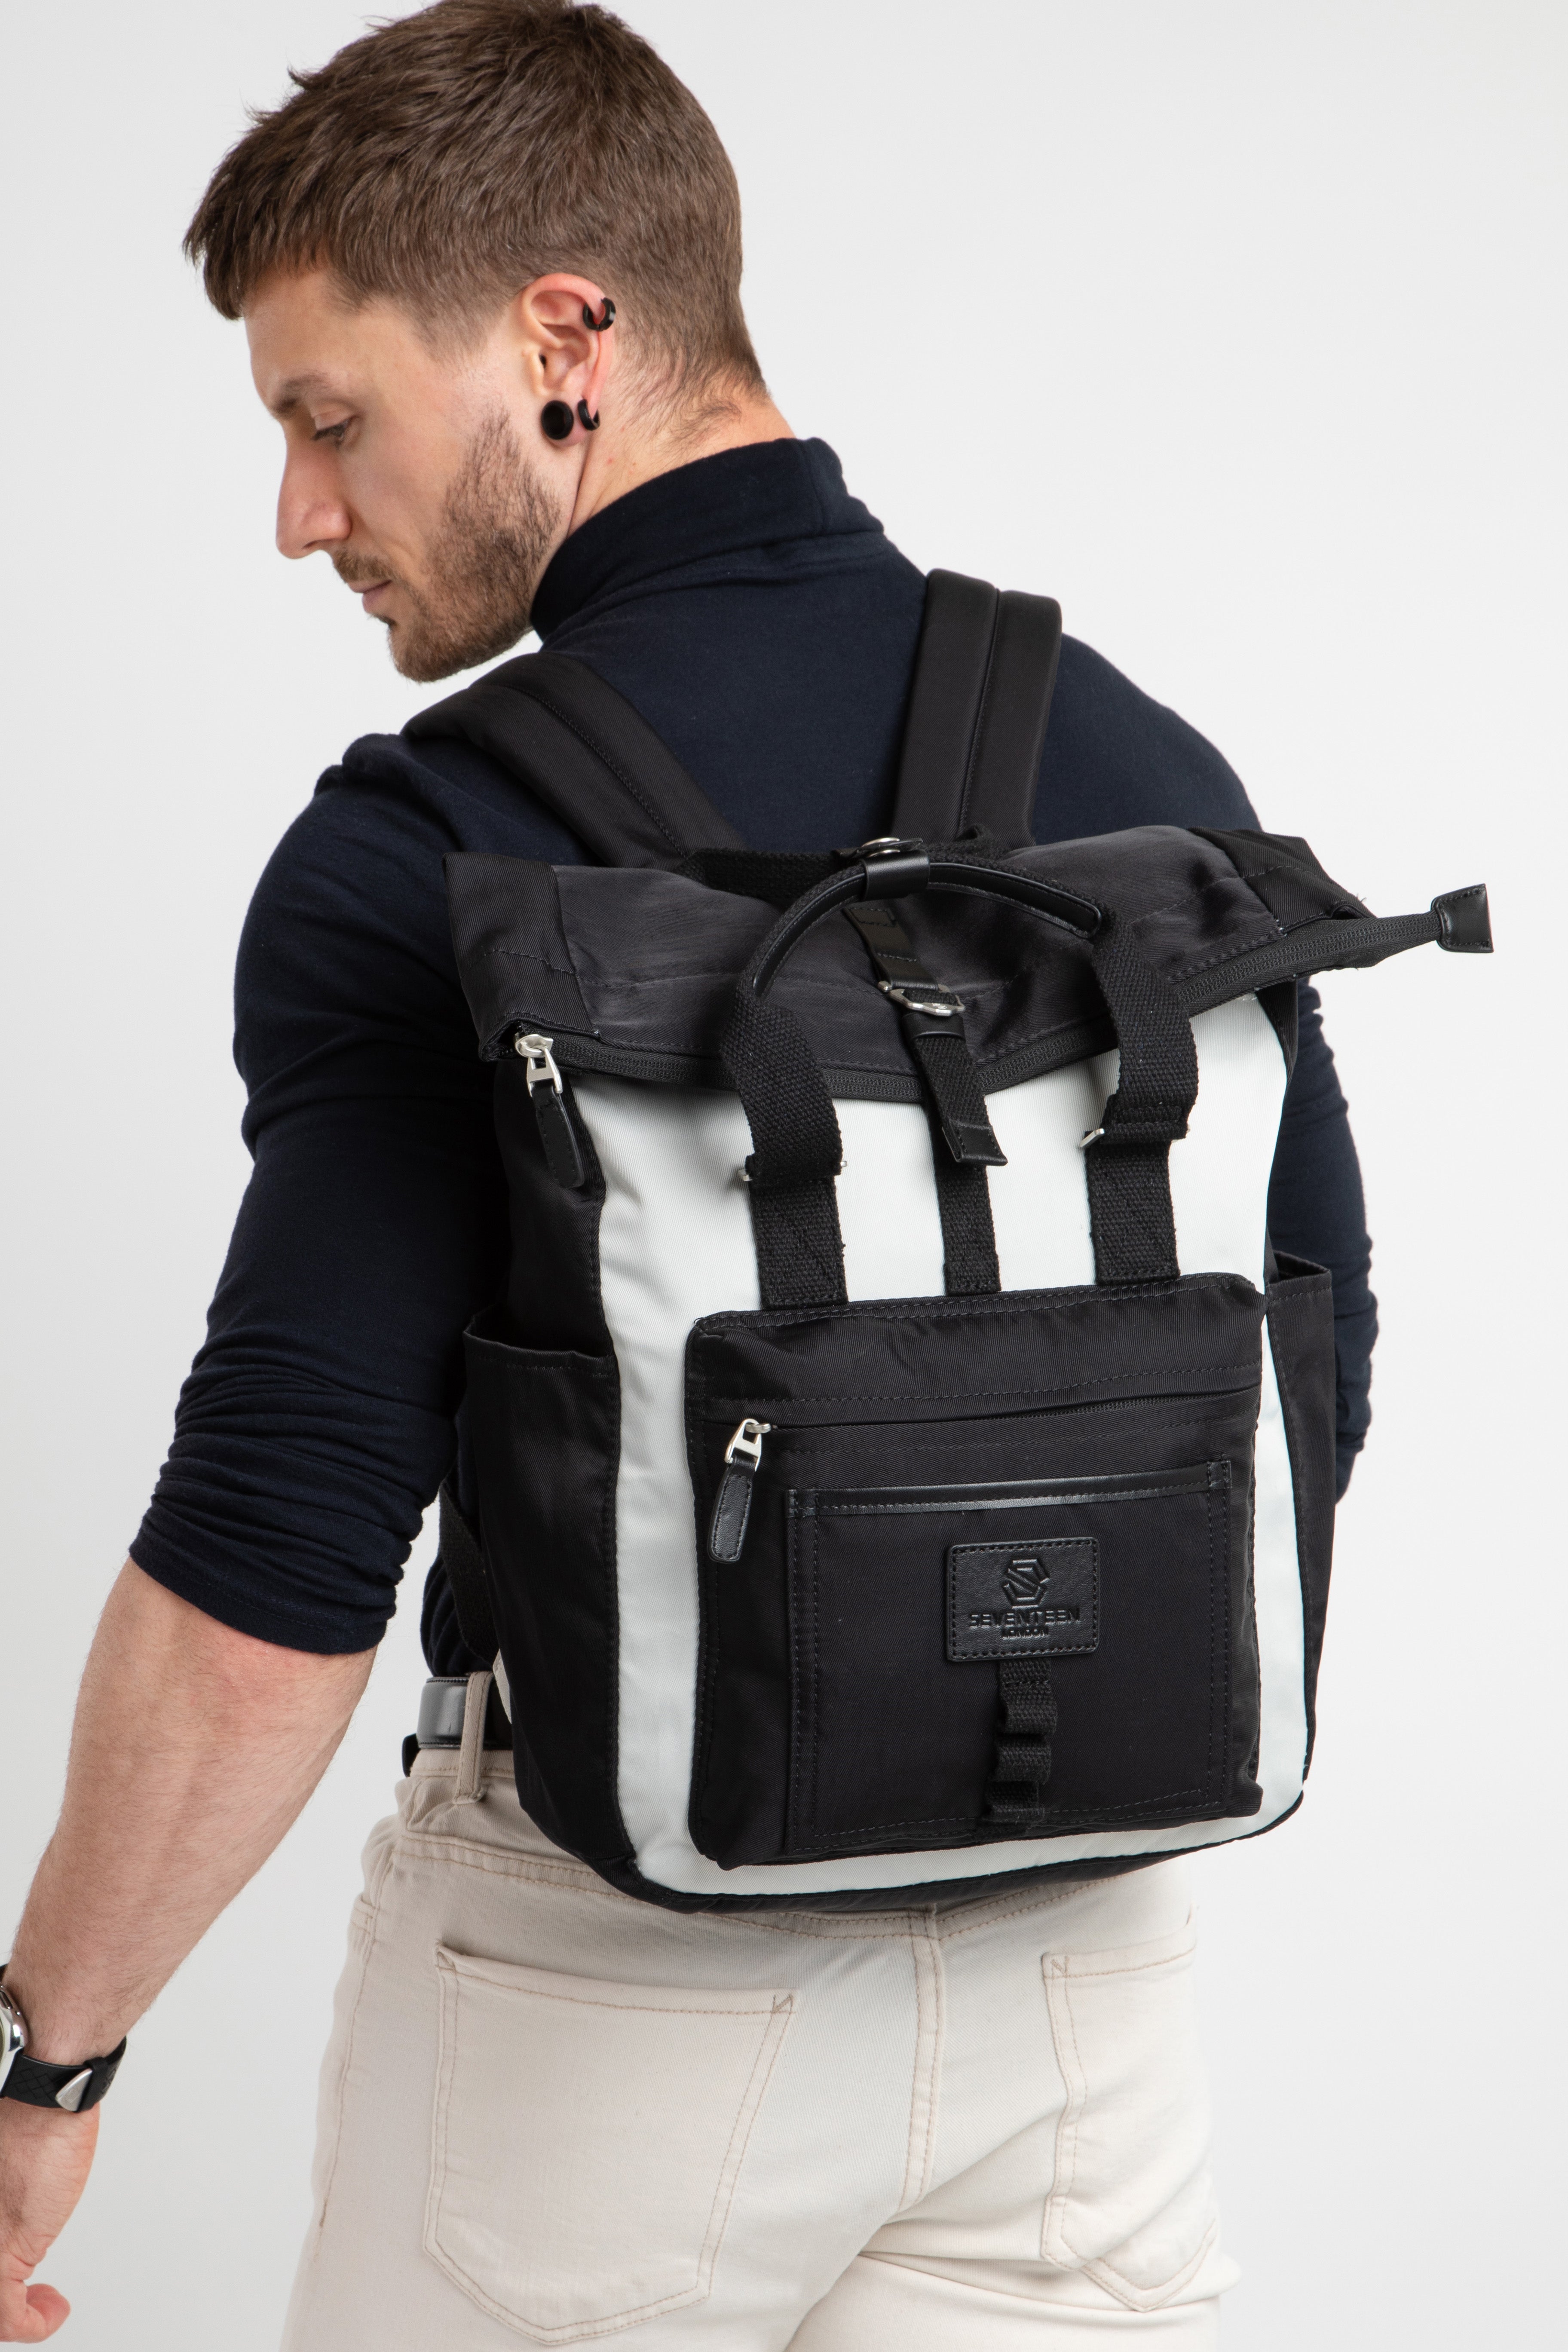 Canary Wharf Backpack - Black with Cream